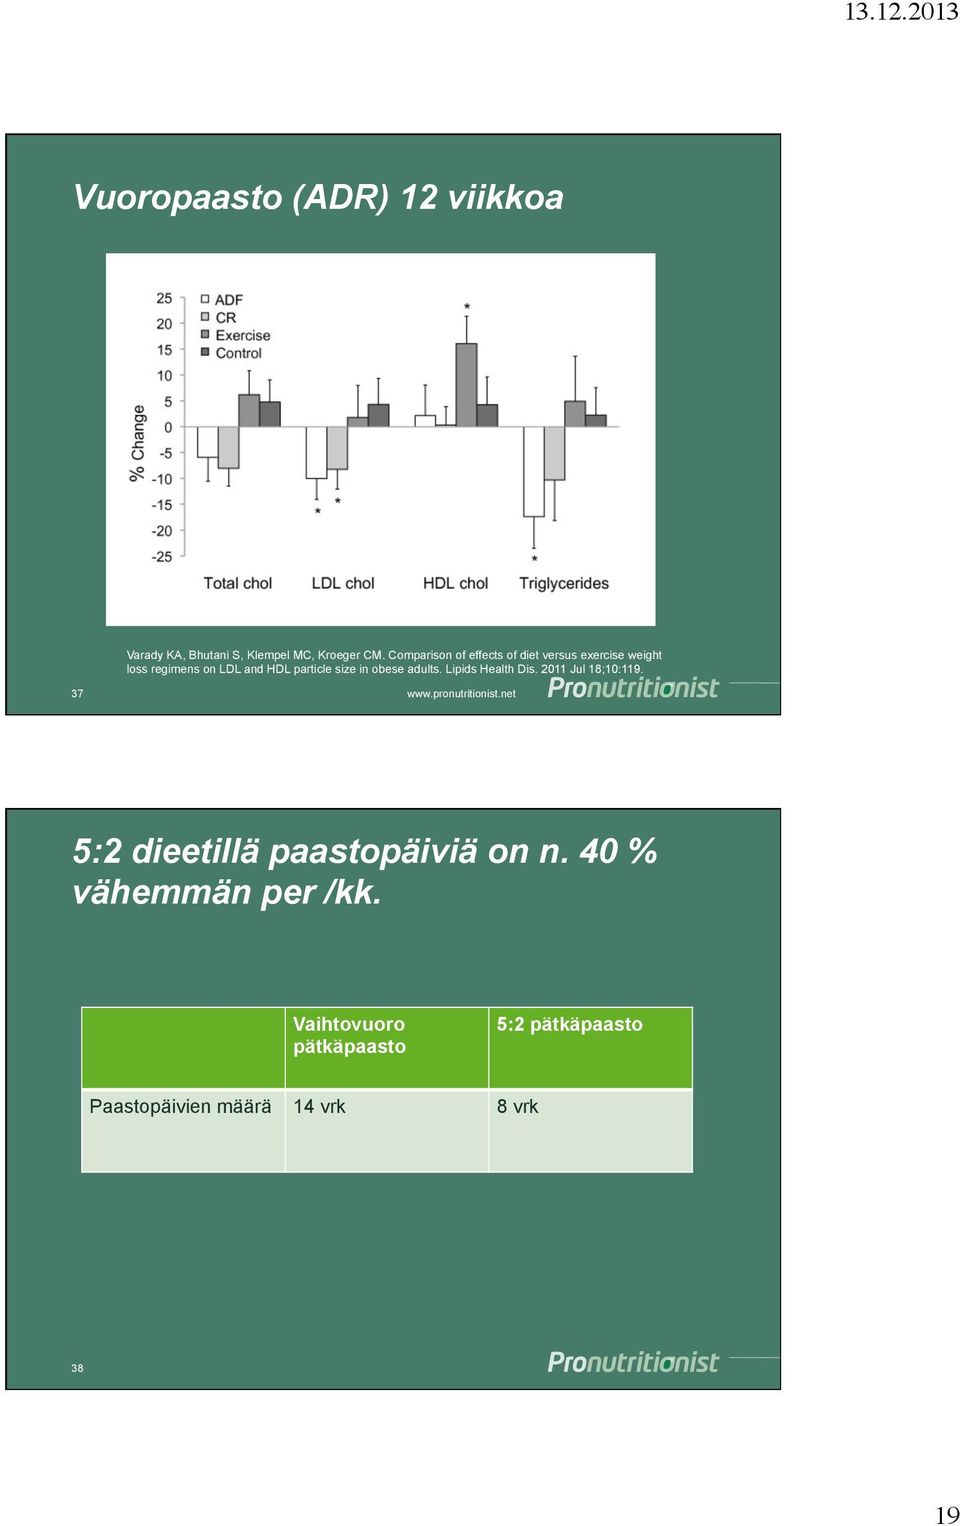 size in obese adults. Lipids Health Dis. 2011 Jul 18;10:119.